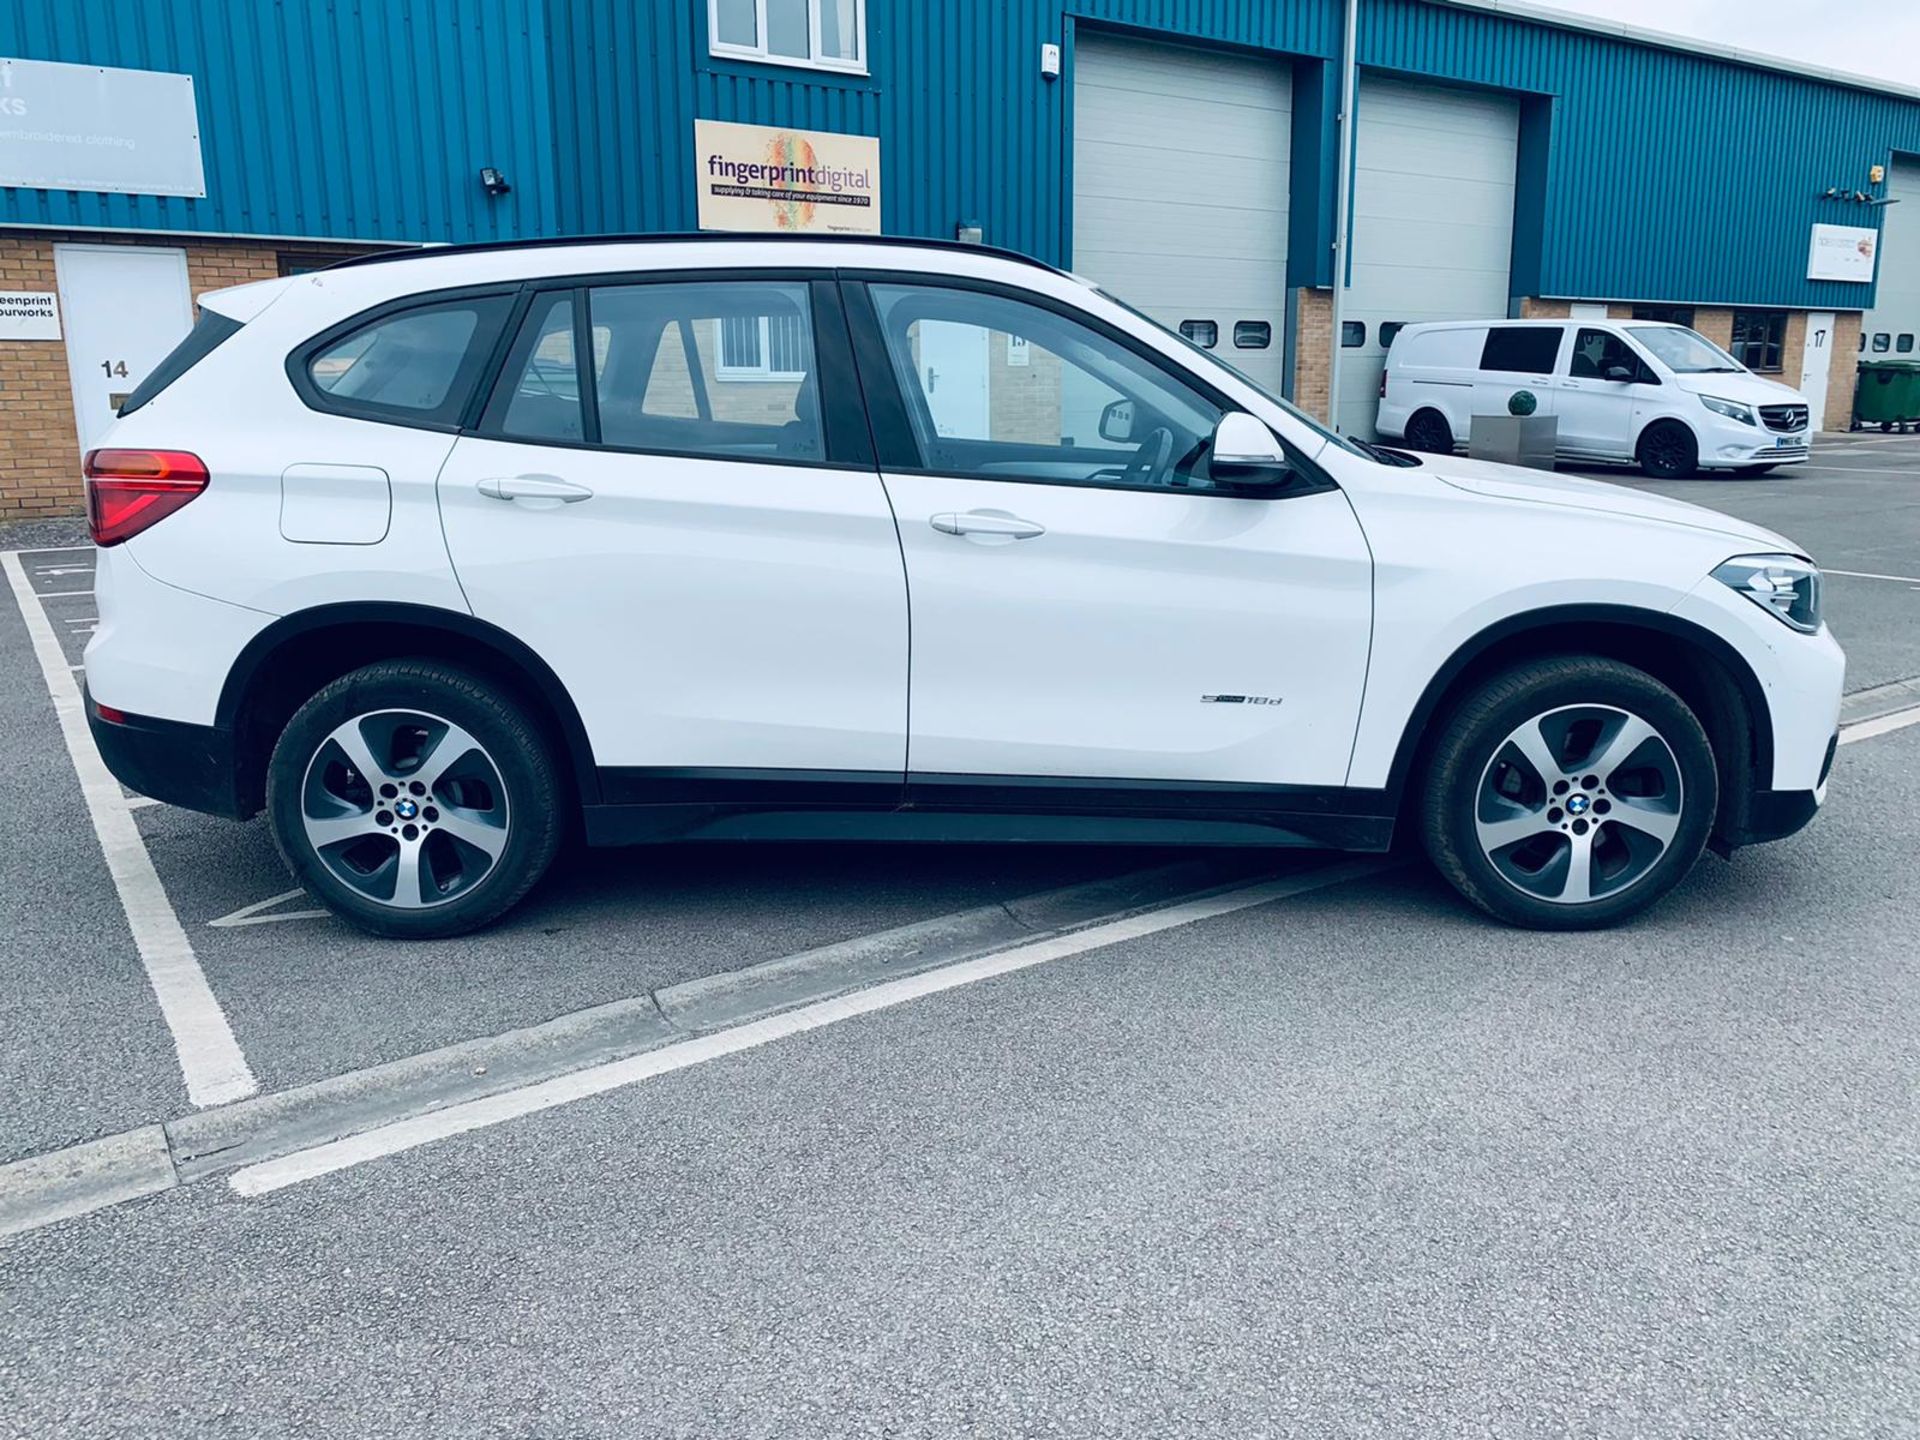 BMW X1 sDrive 2.0d Special Equipment Auto - 2018 Reg - Service History - 1 Owner From New - Image 4 of 25